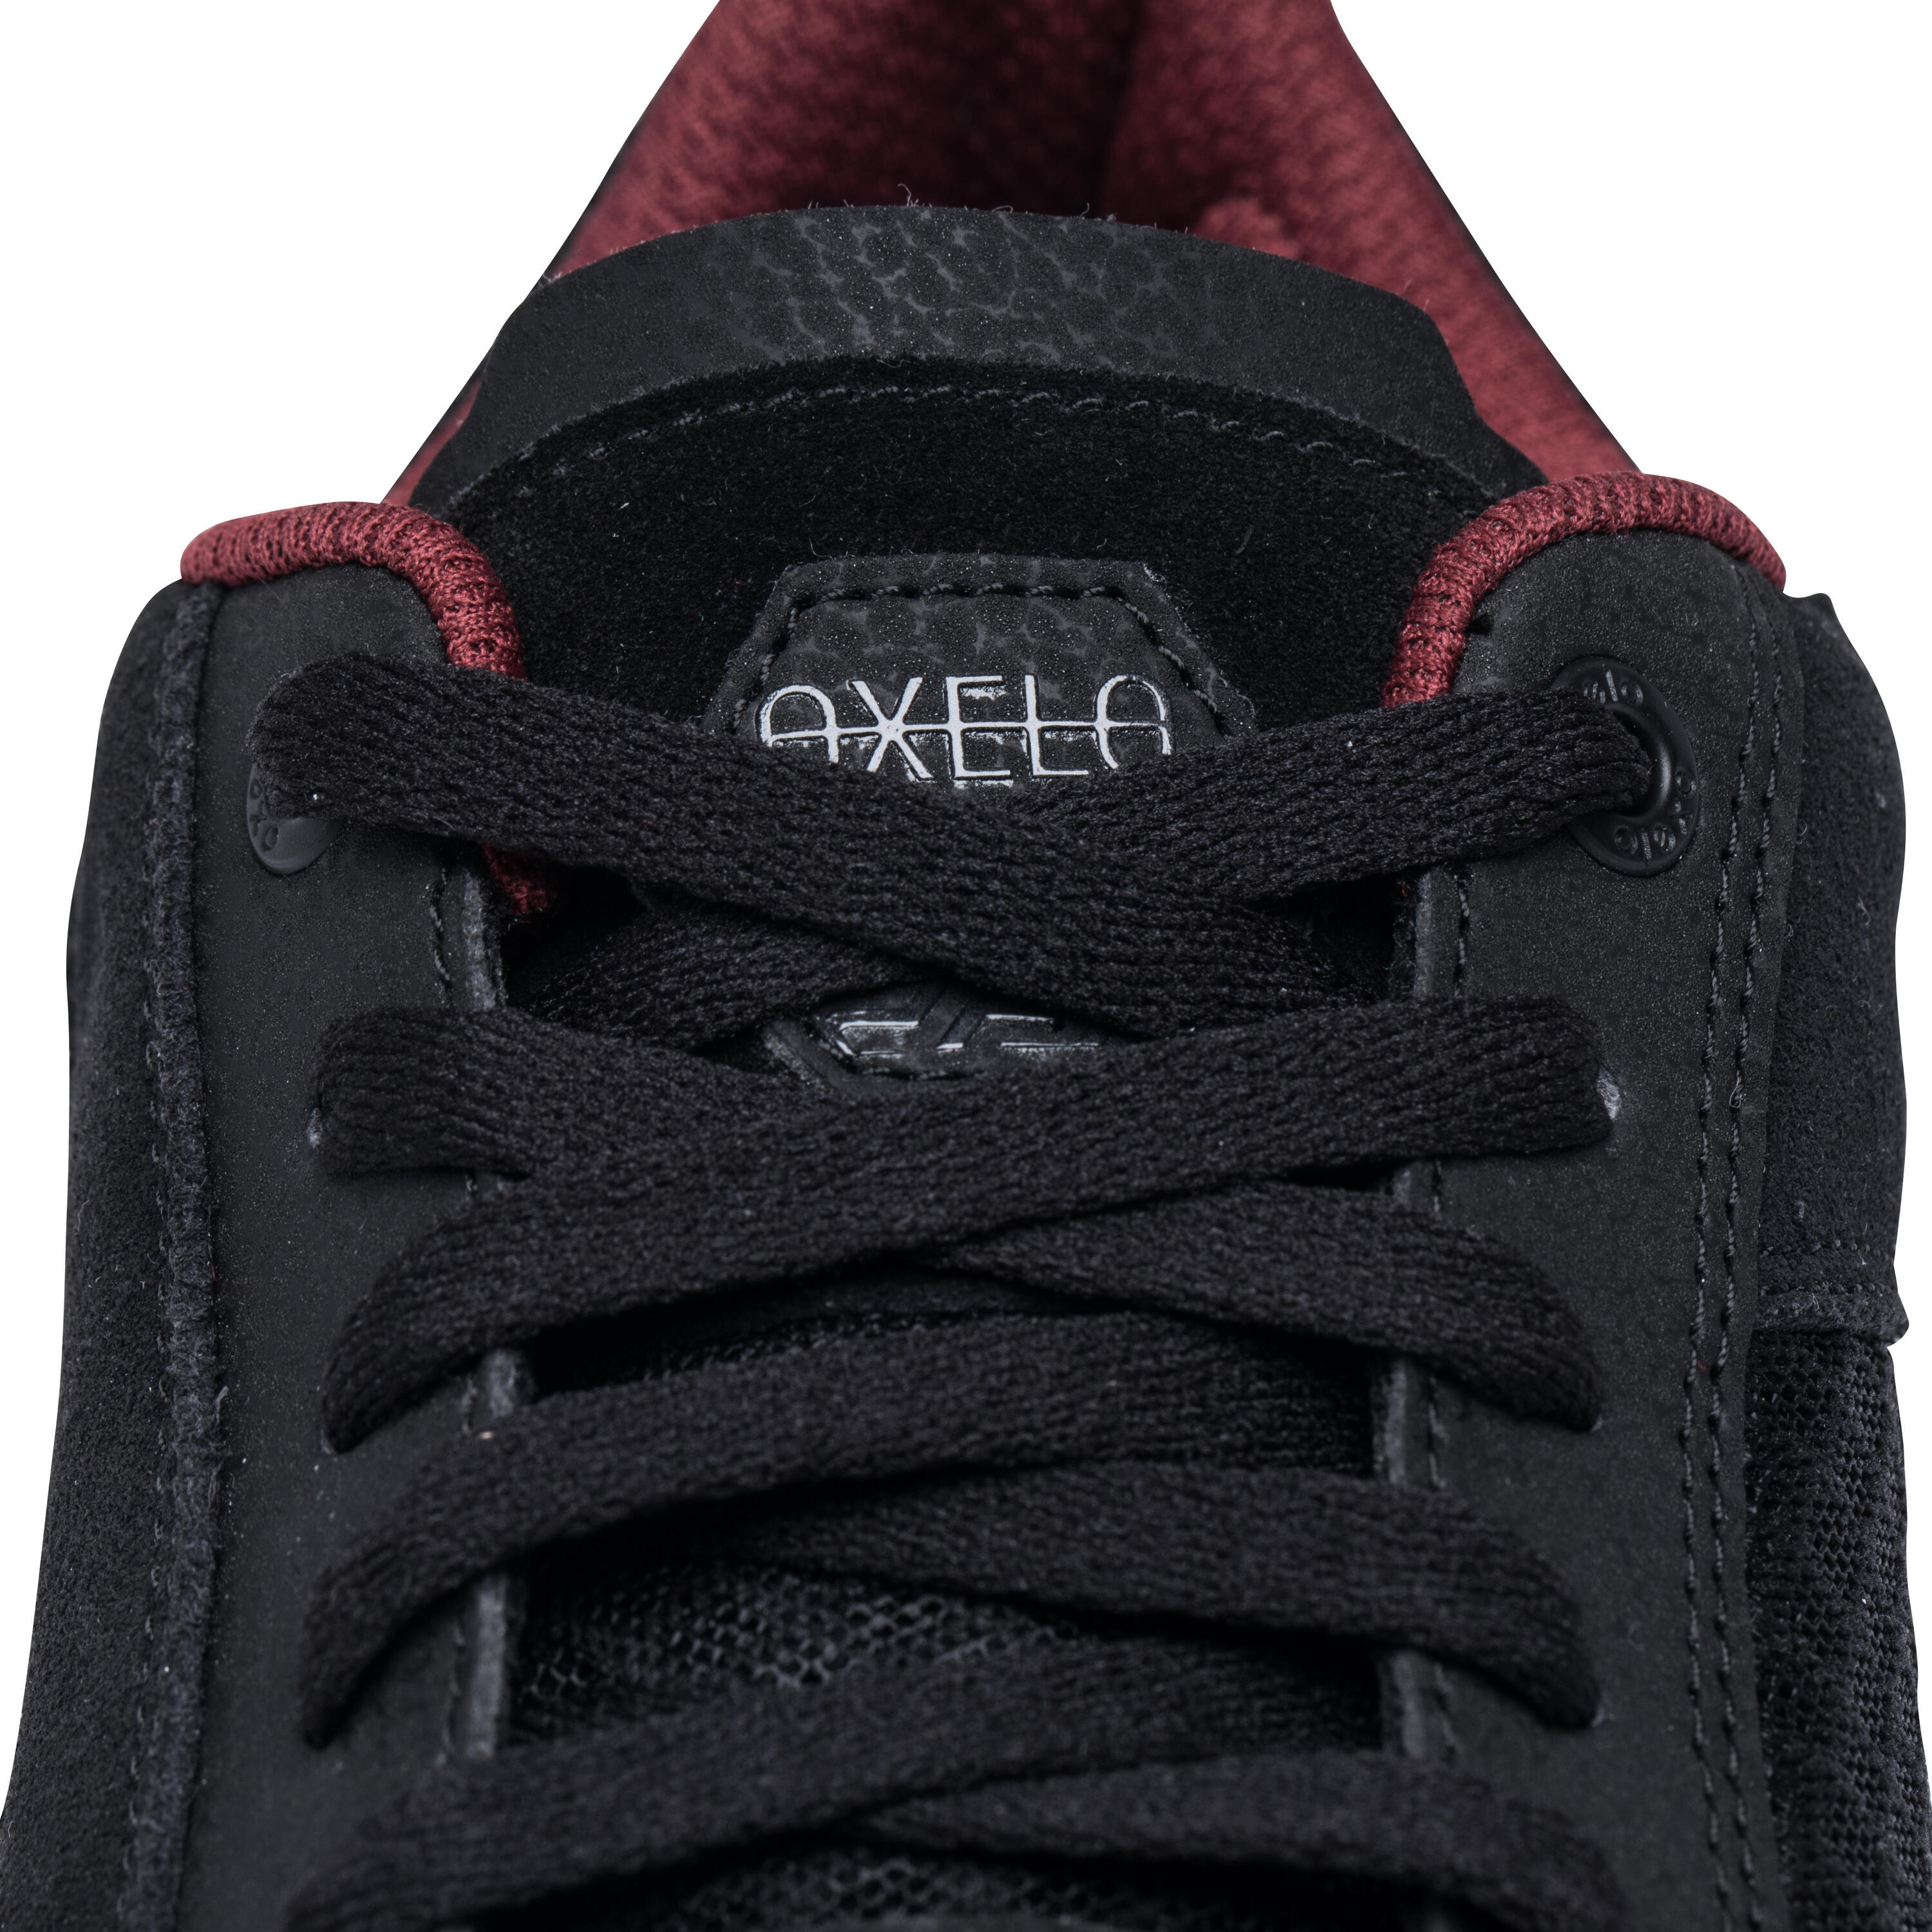 Crush 500 Adult Low-Top Cupsole Skate Shoes - Black/Burgundy 10/14